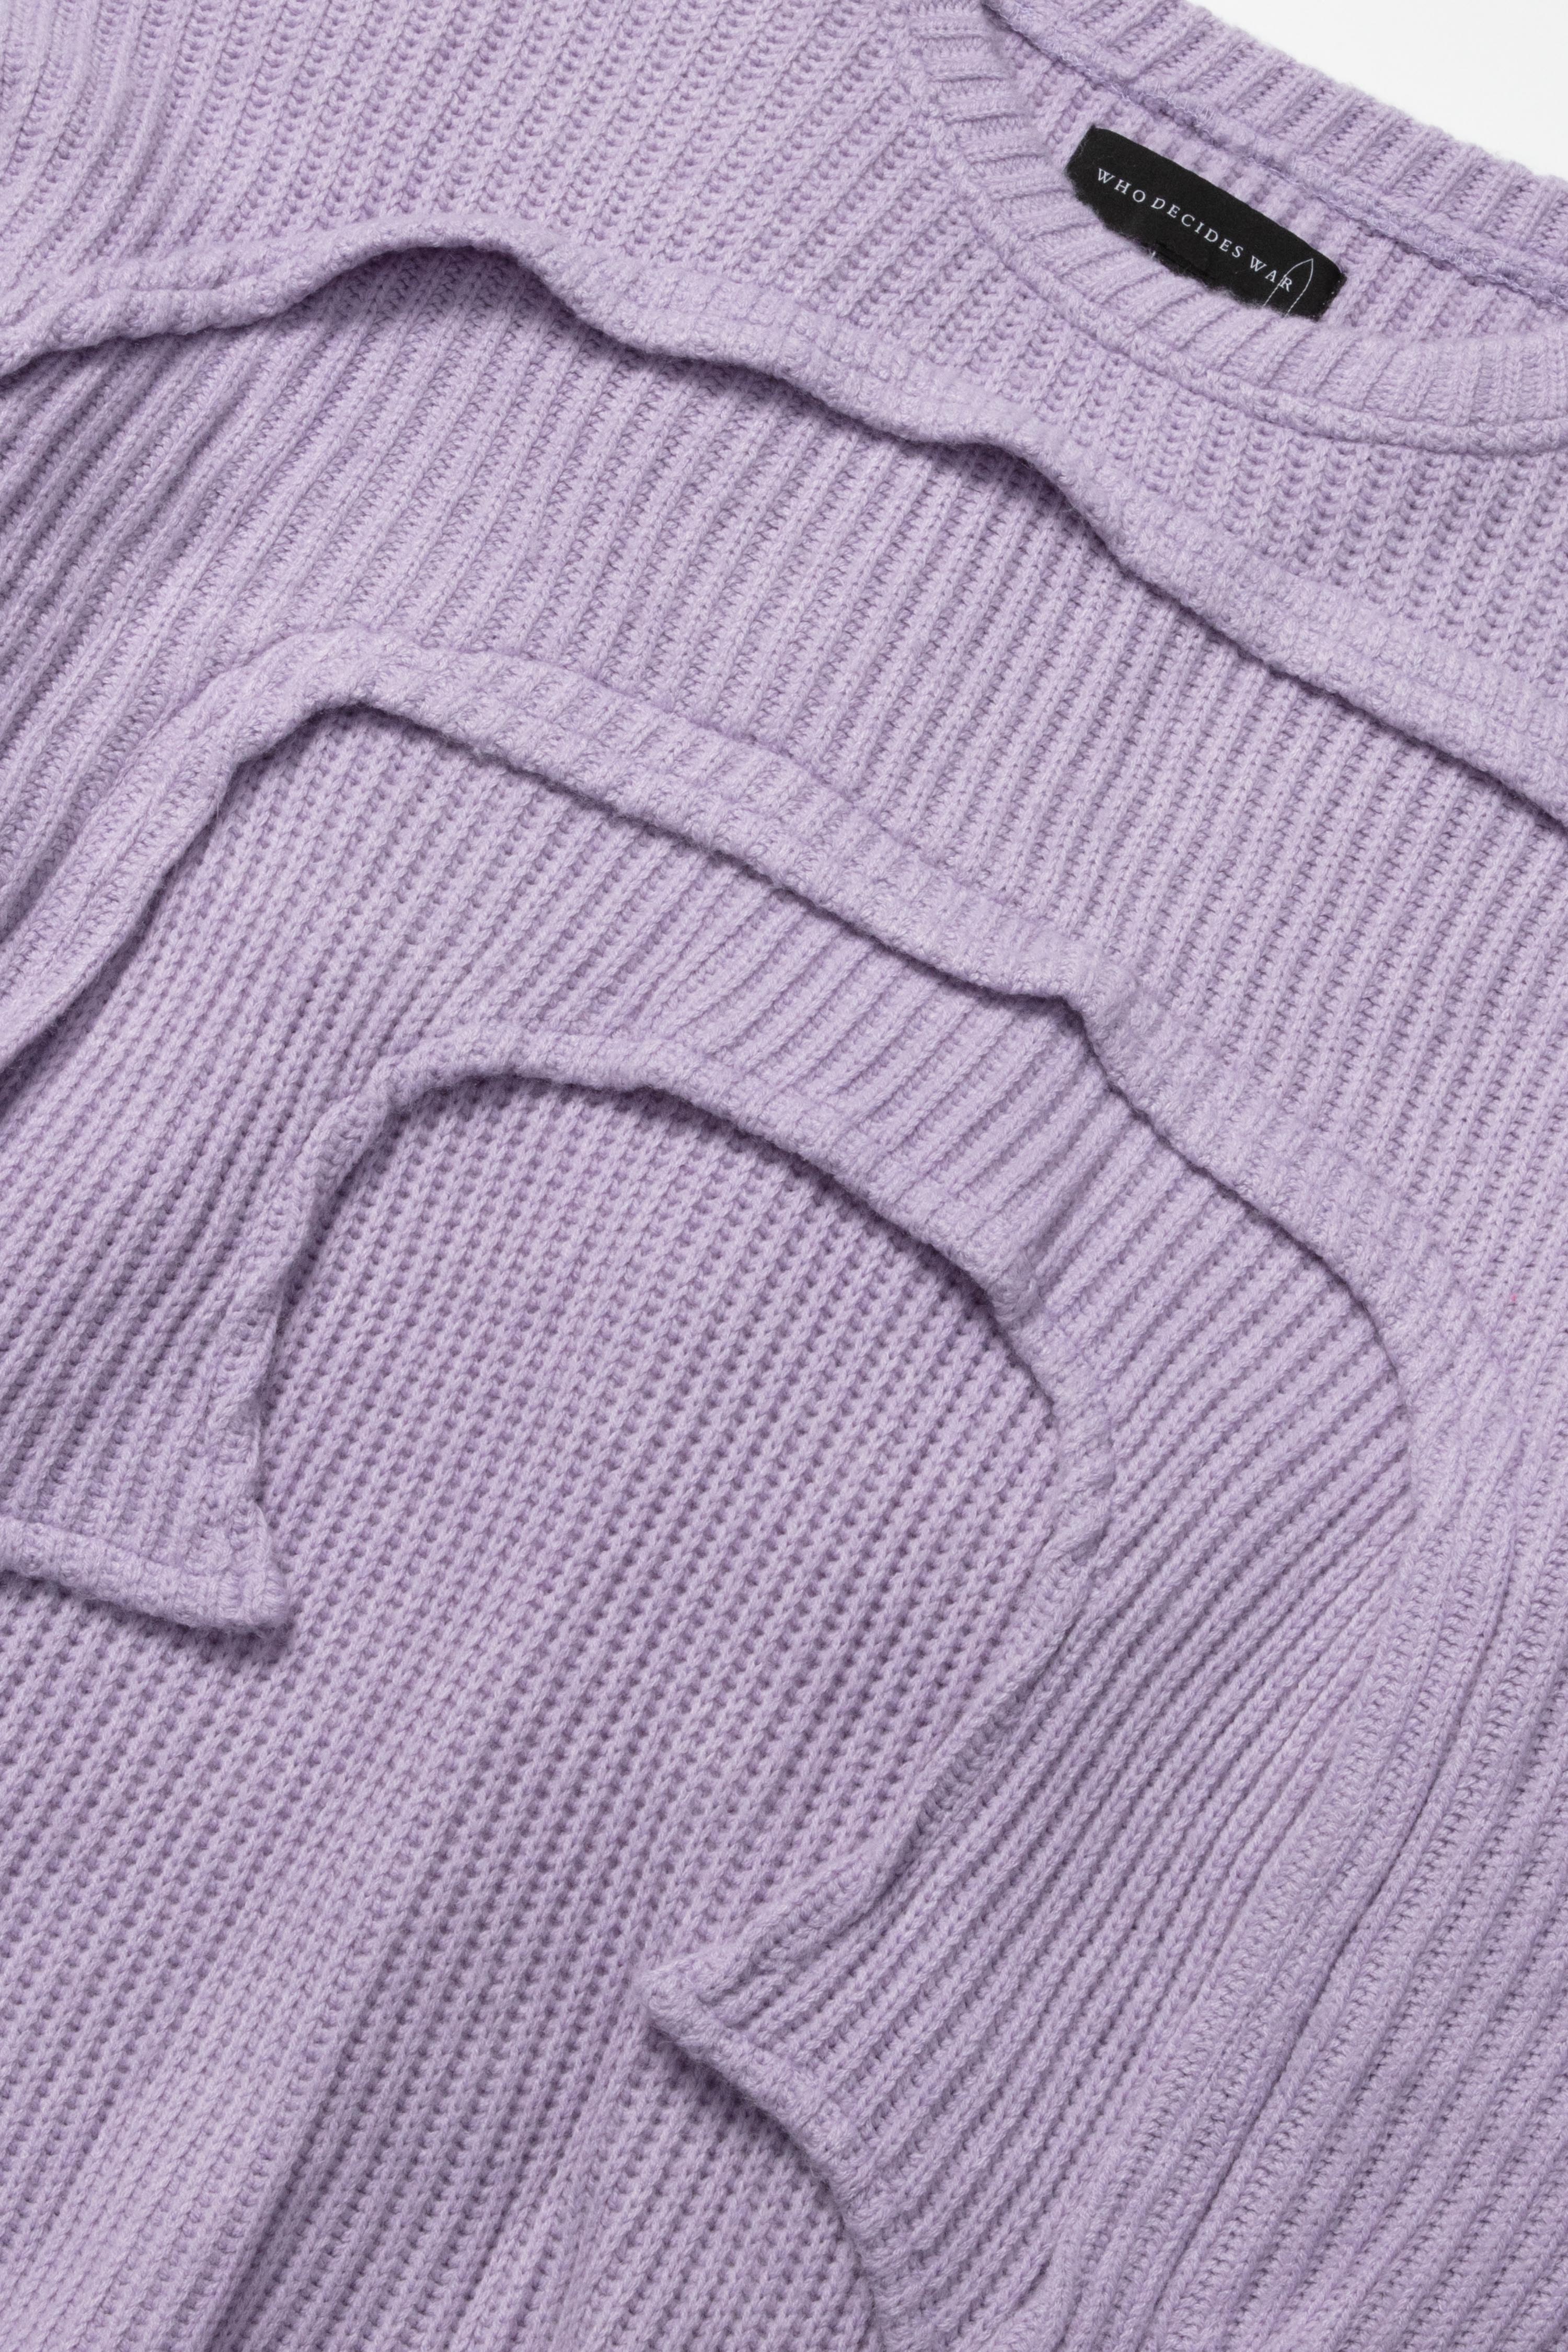 L'ARC WOVEN SWEATER